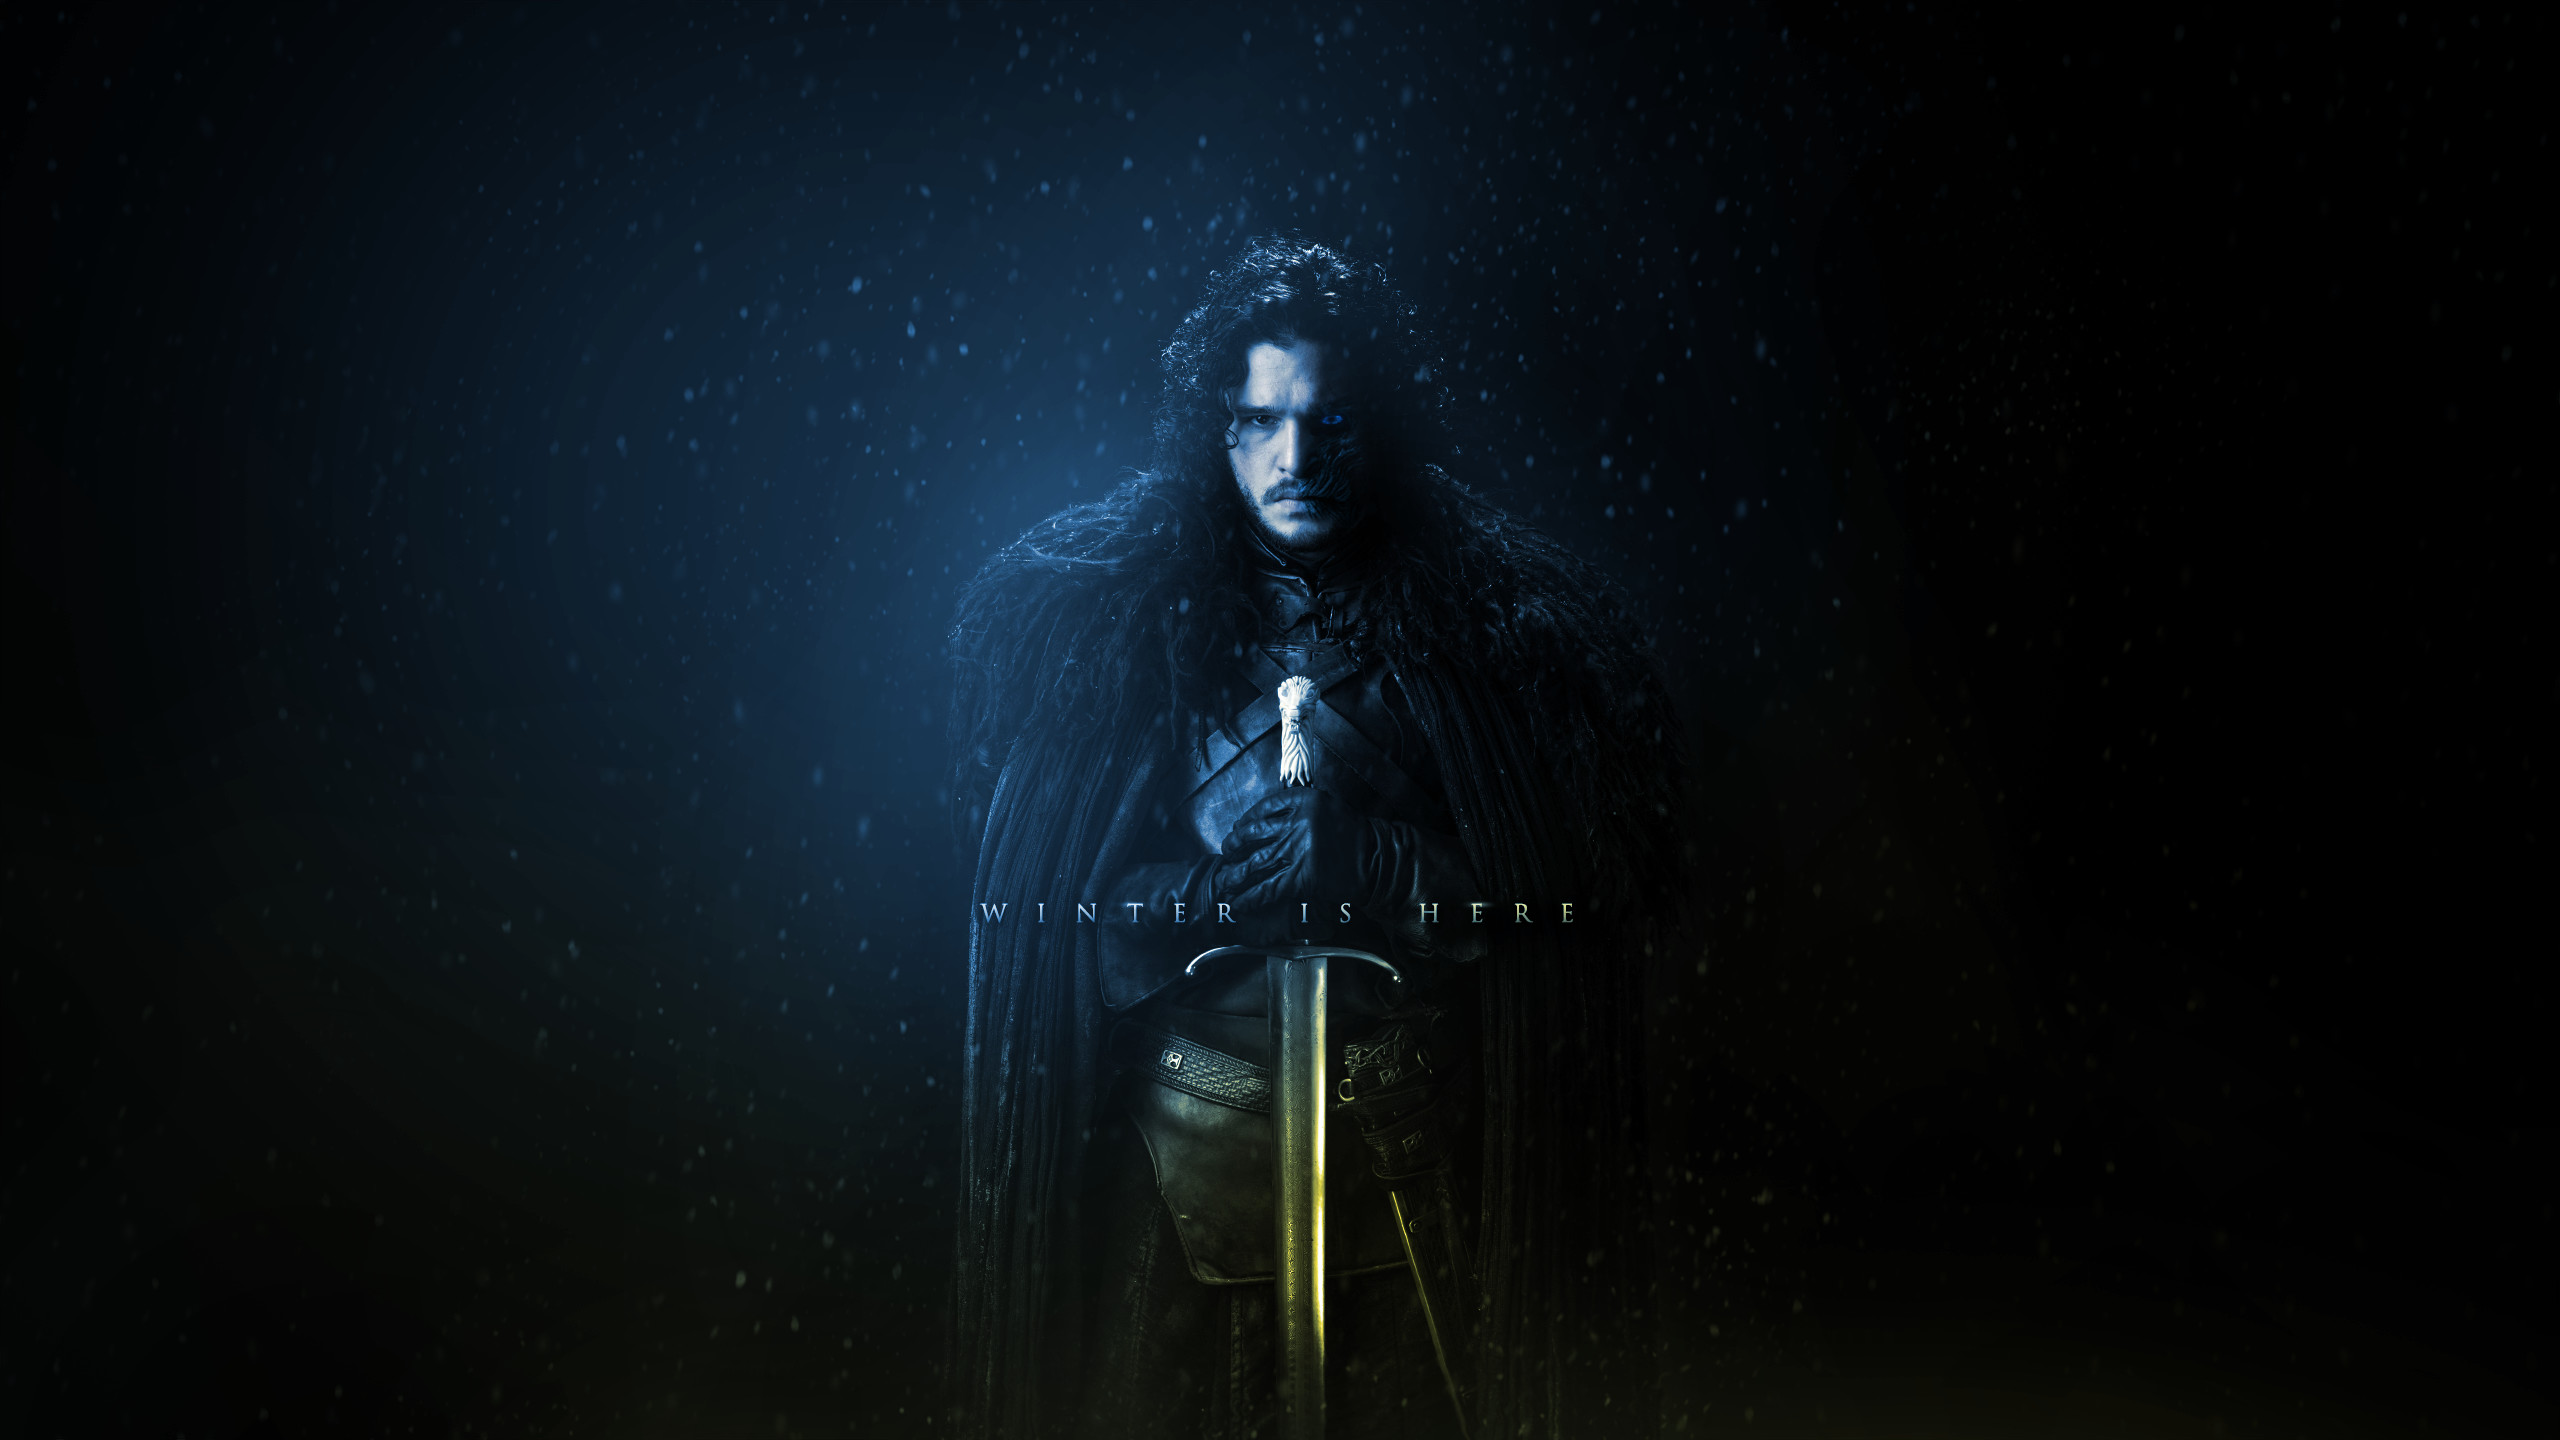 2560x1440 ... Game of Thrones Wallpaper - Jon Snow by RockLou